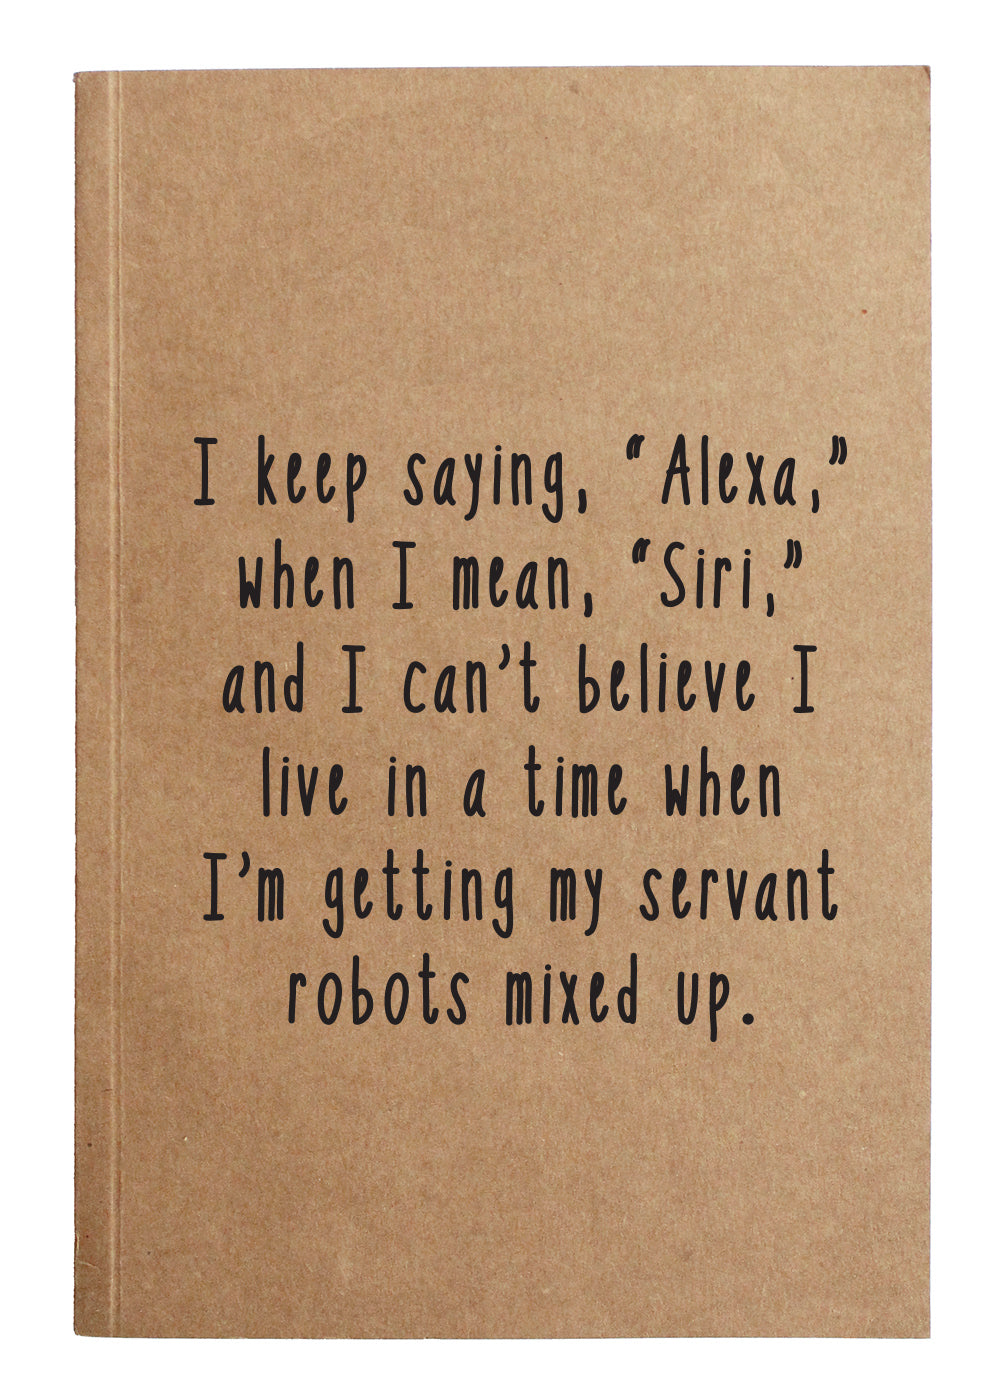 I keep saying, "Alexa," when I mean, "Siri," and I can't believe I live in a tie when I'm getting my servant robots mixed up. kraft notebook